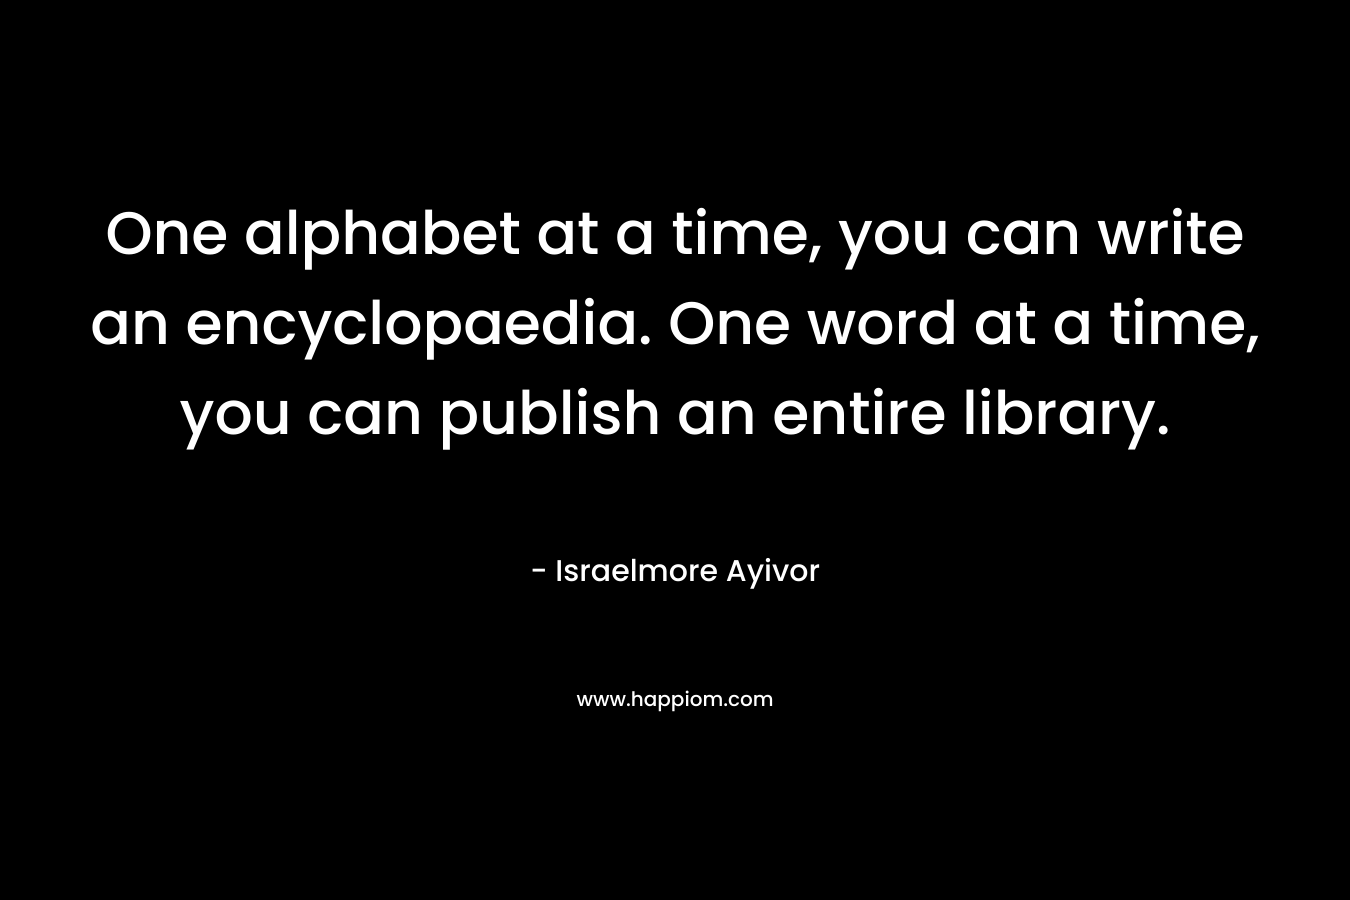 One alphabet at a time, you can write an encyclopaedia. One word at a time, you can publish an entire library. – Israelmore Ayivor